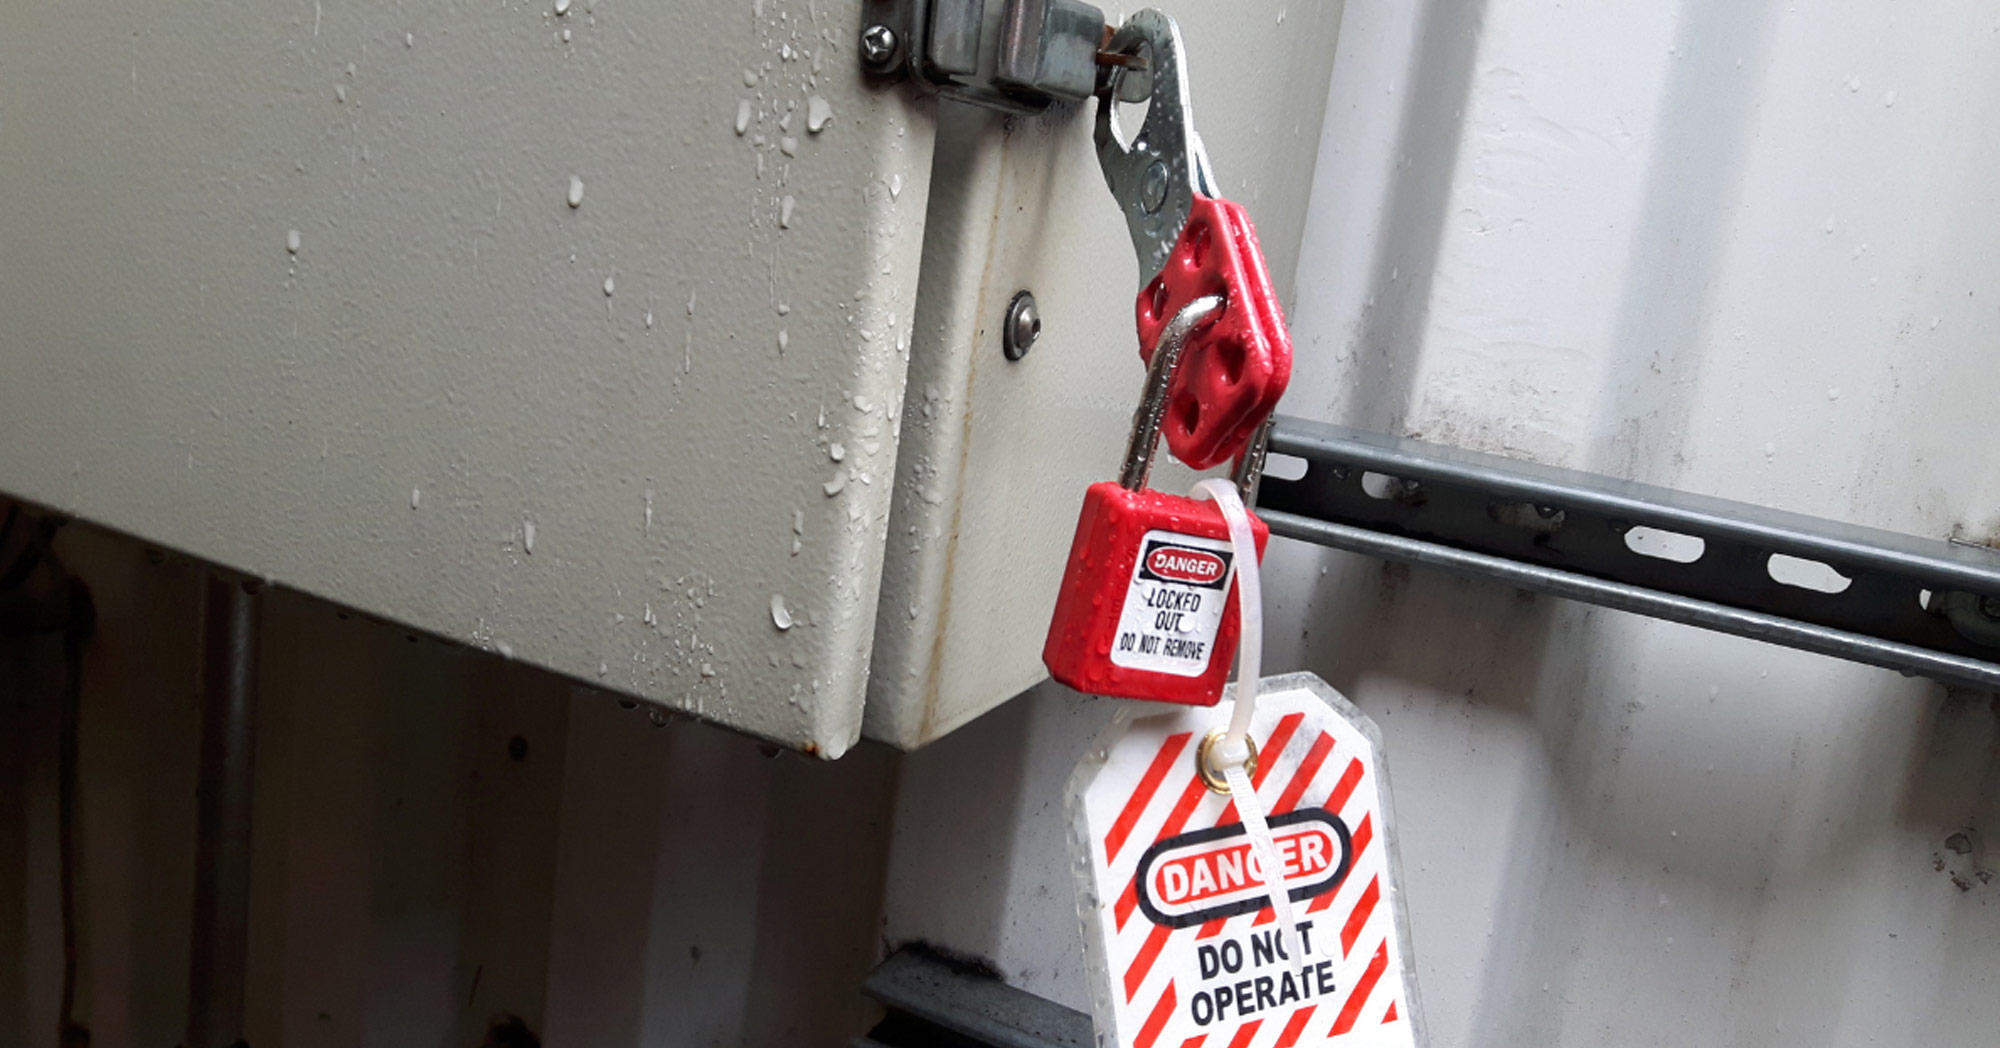 Everything you need to know about Lockout/Tagout